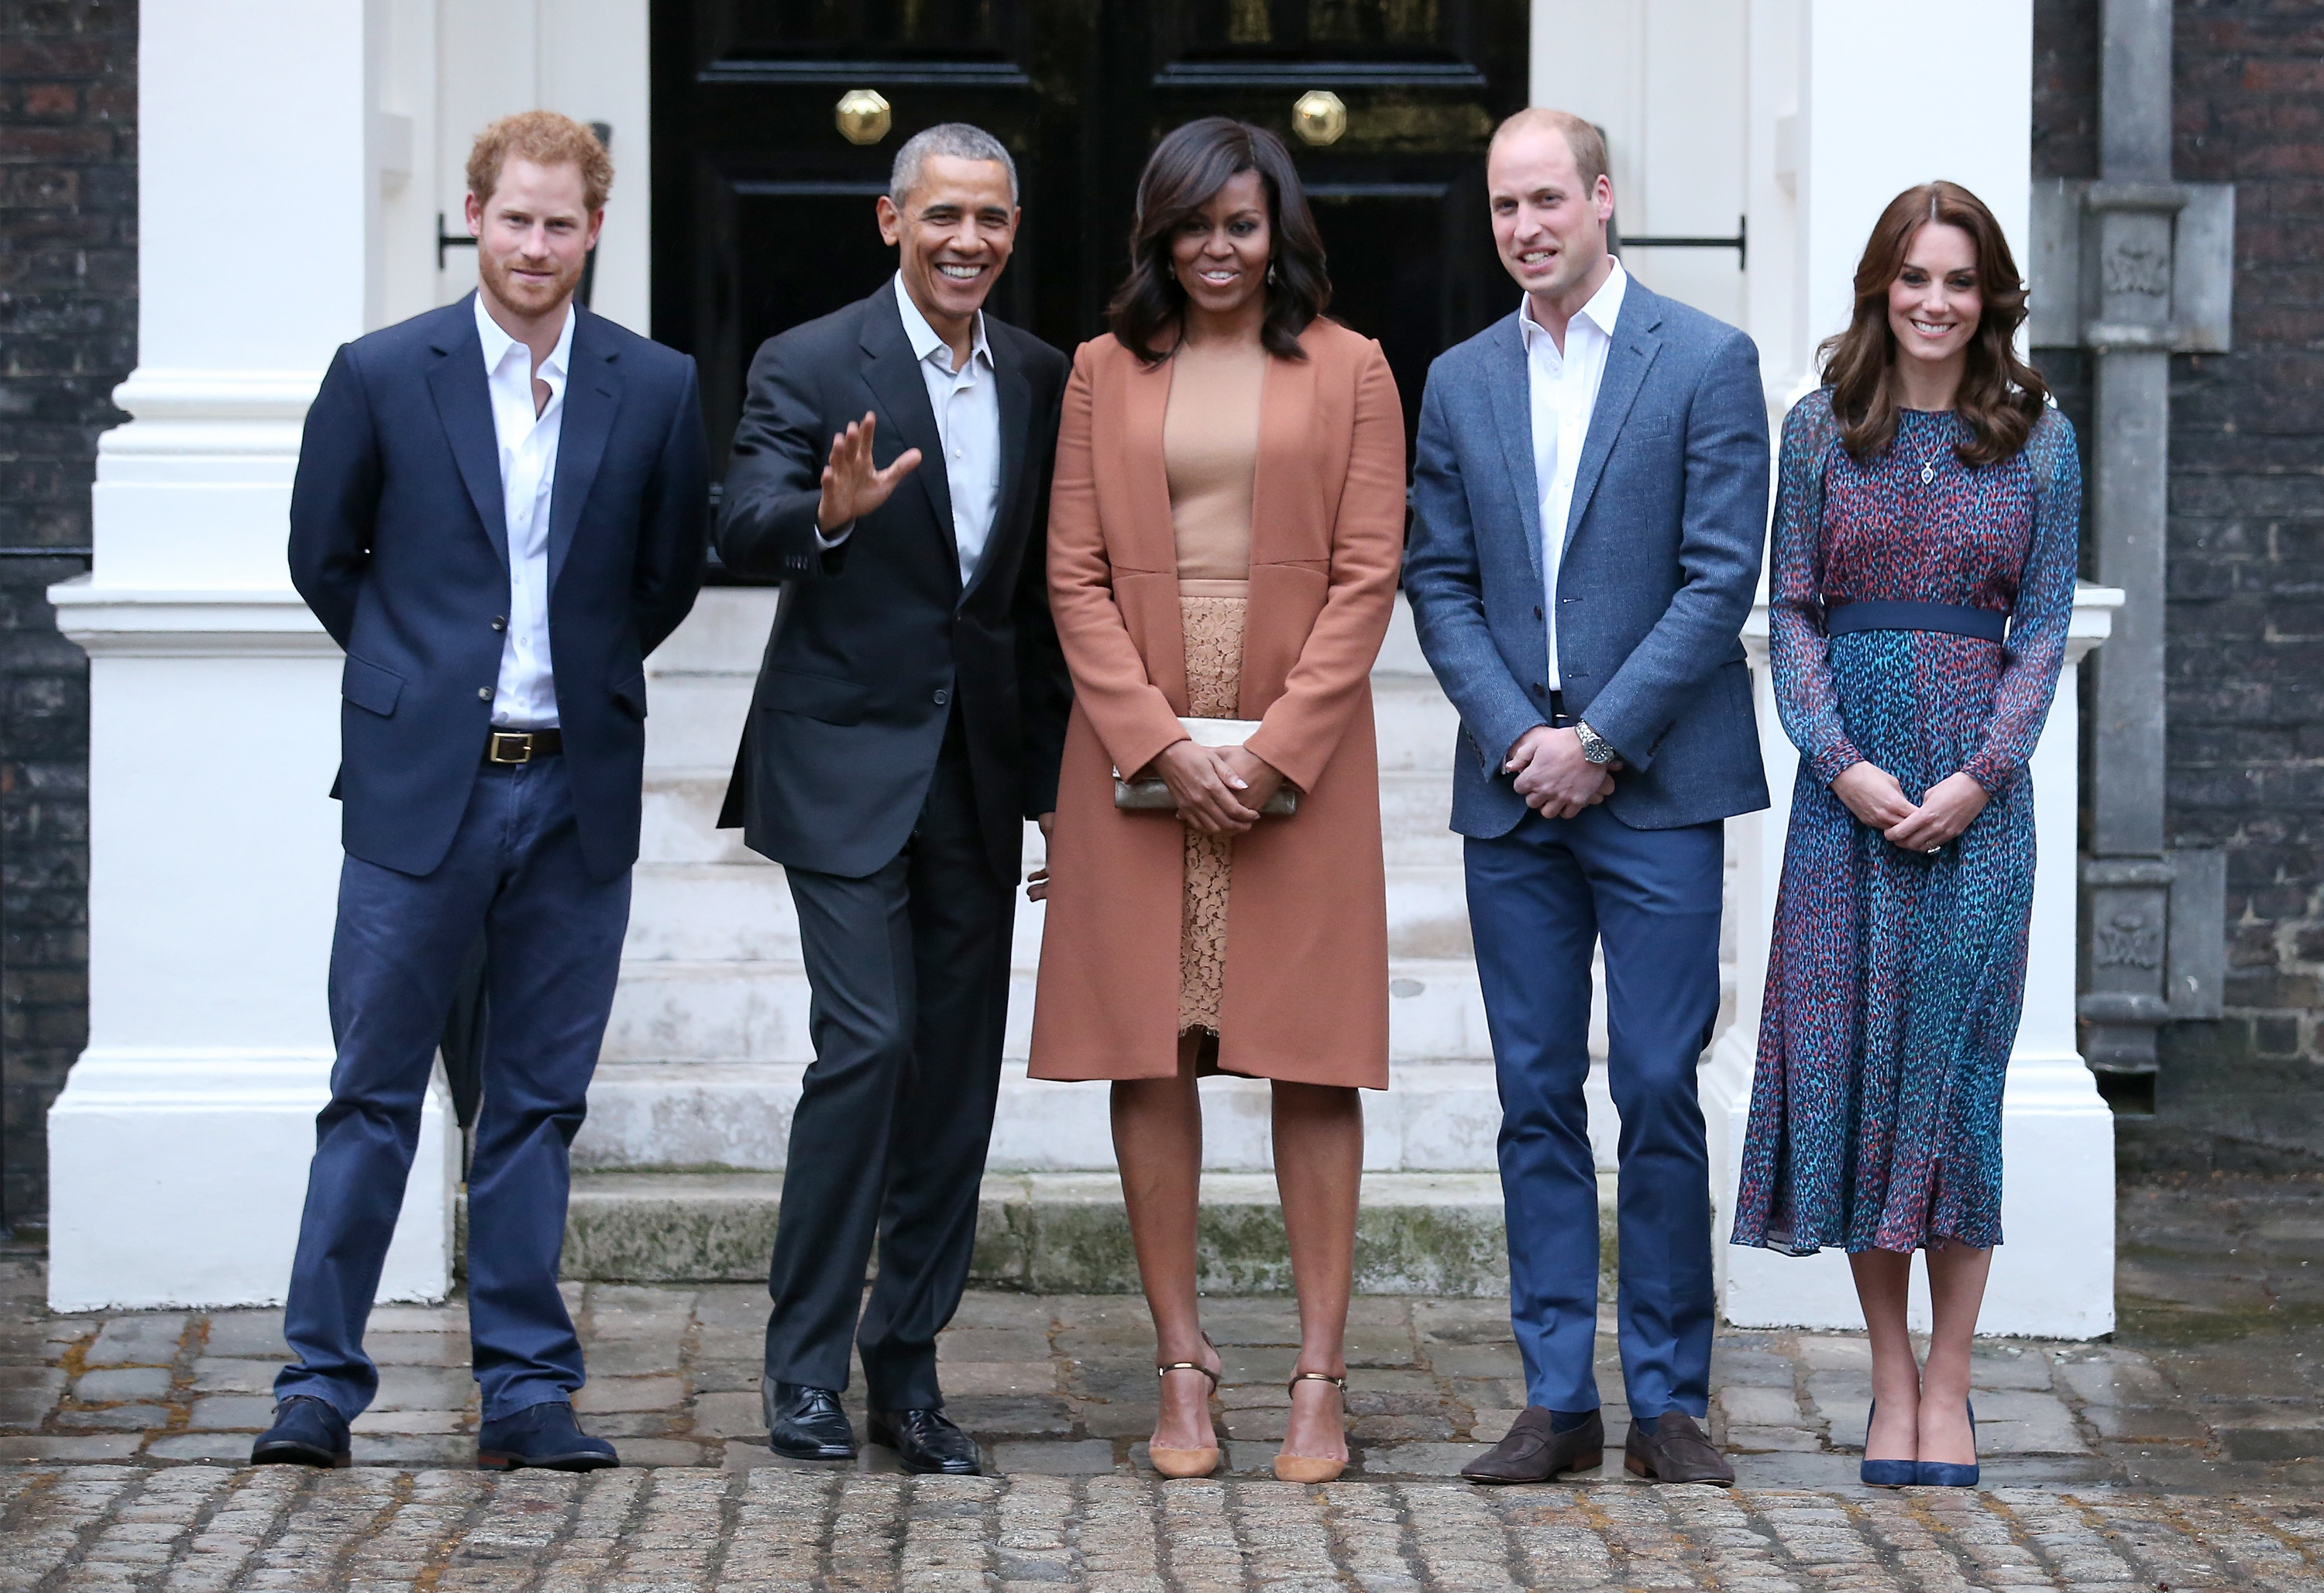 Prince Harry, Barack Obama, Former First LadyMichelle Obama, Prince William, and Catherine, Duchess of Cambridge pose together for a photo, dressed semi-formally